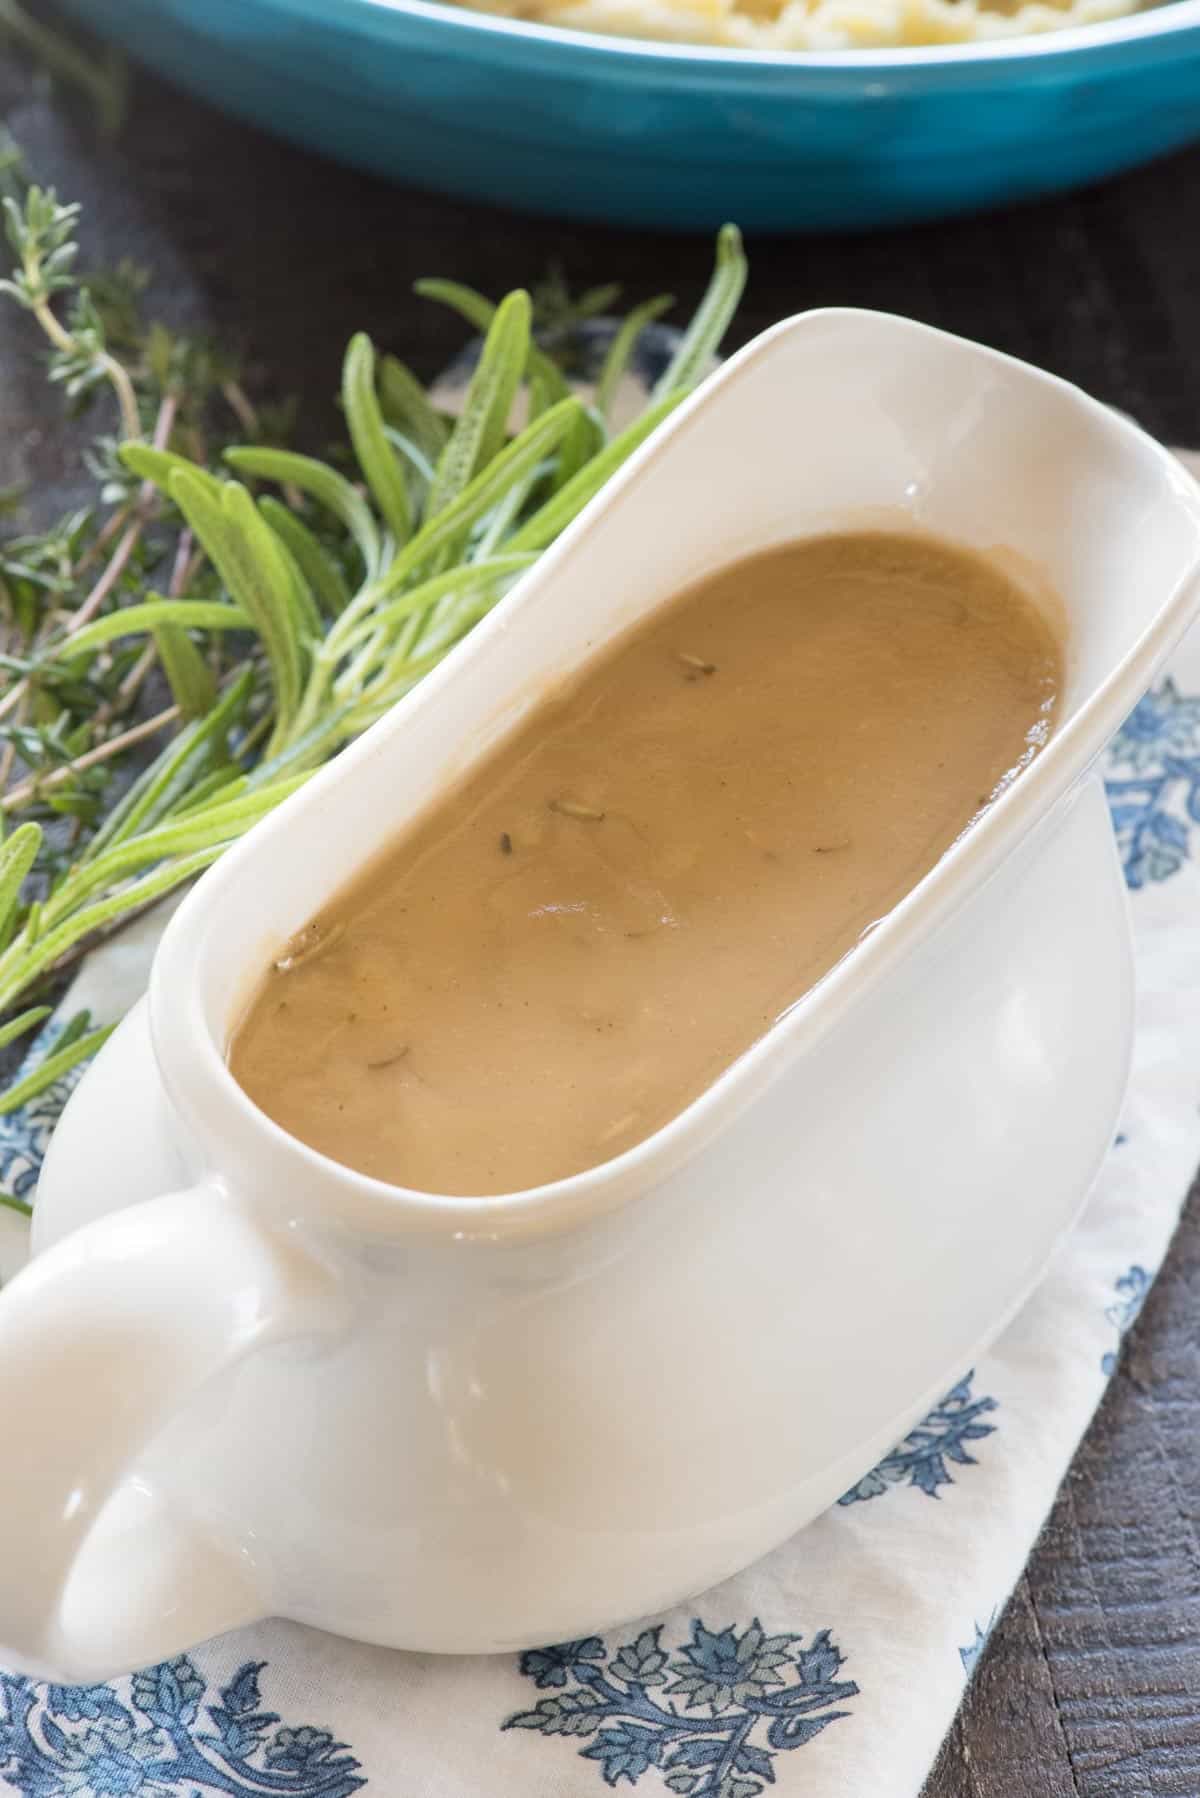 Brown Onion Gravy Recipe using Drippings or Beef Broth